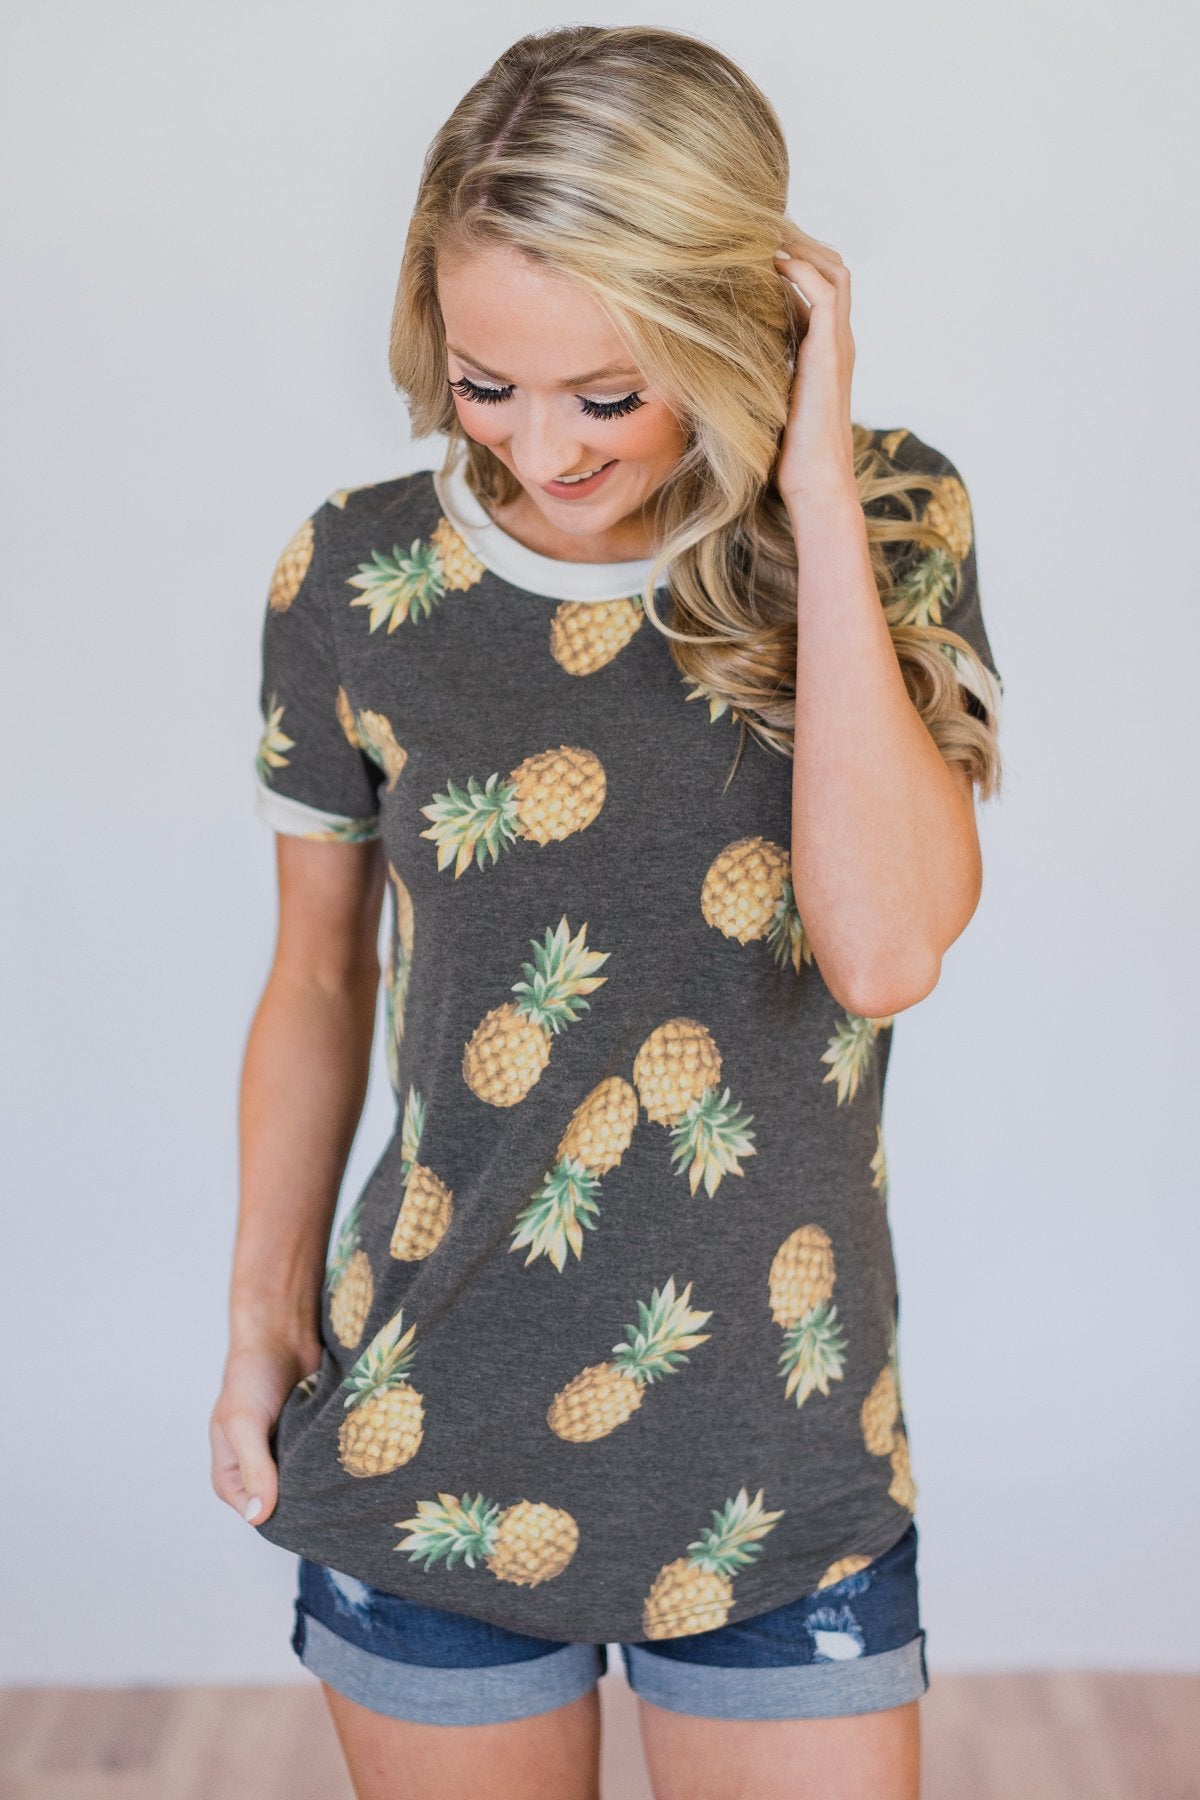 More of Summer Pineapple Top- Charcoal